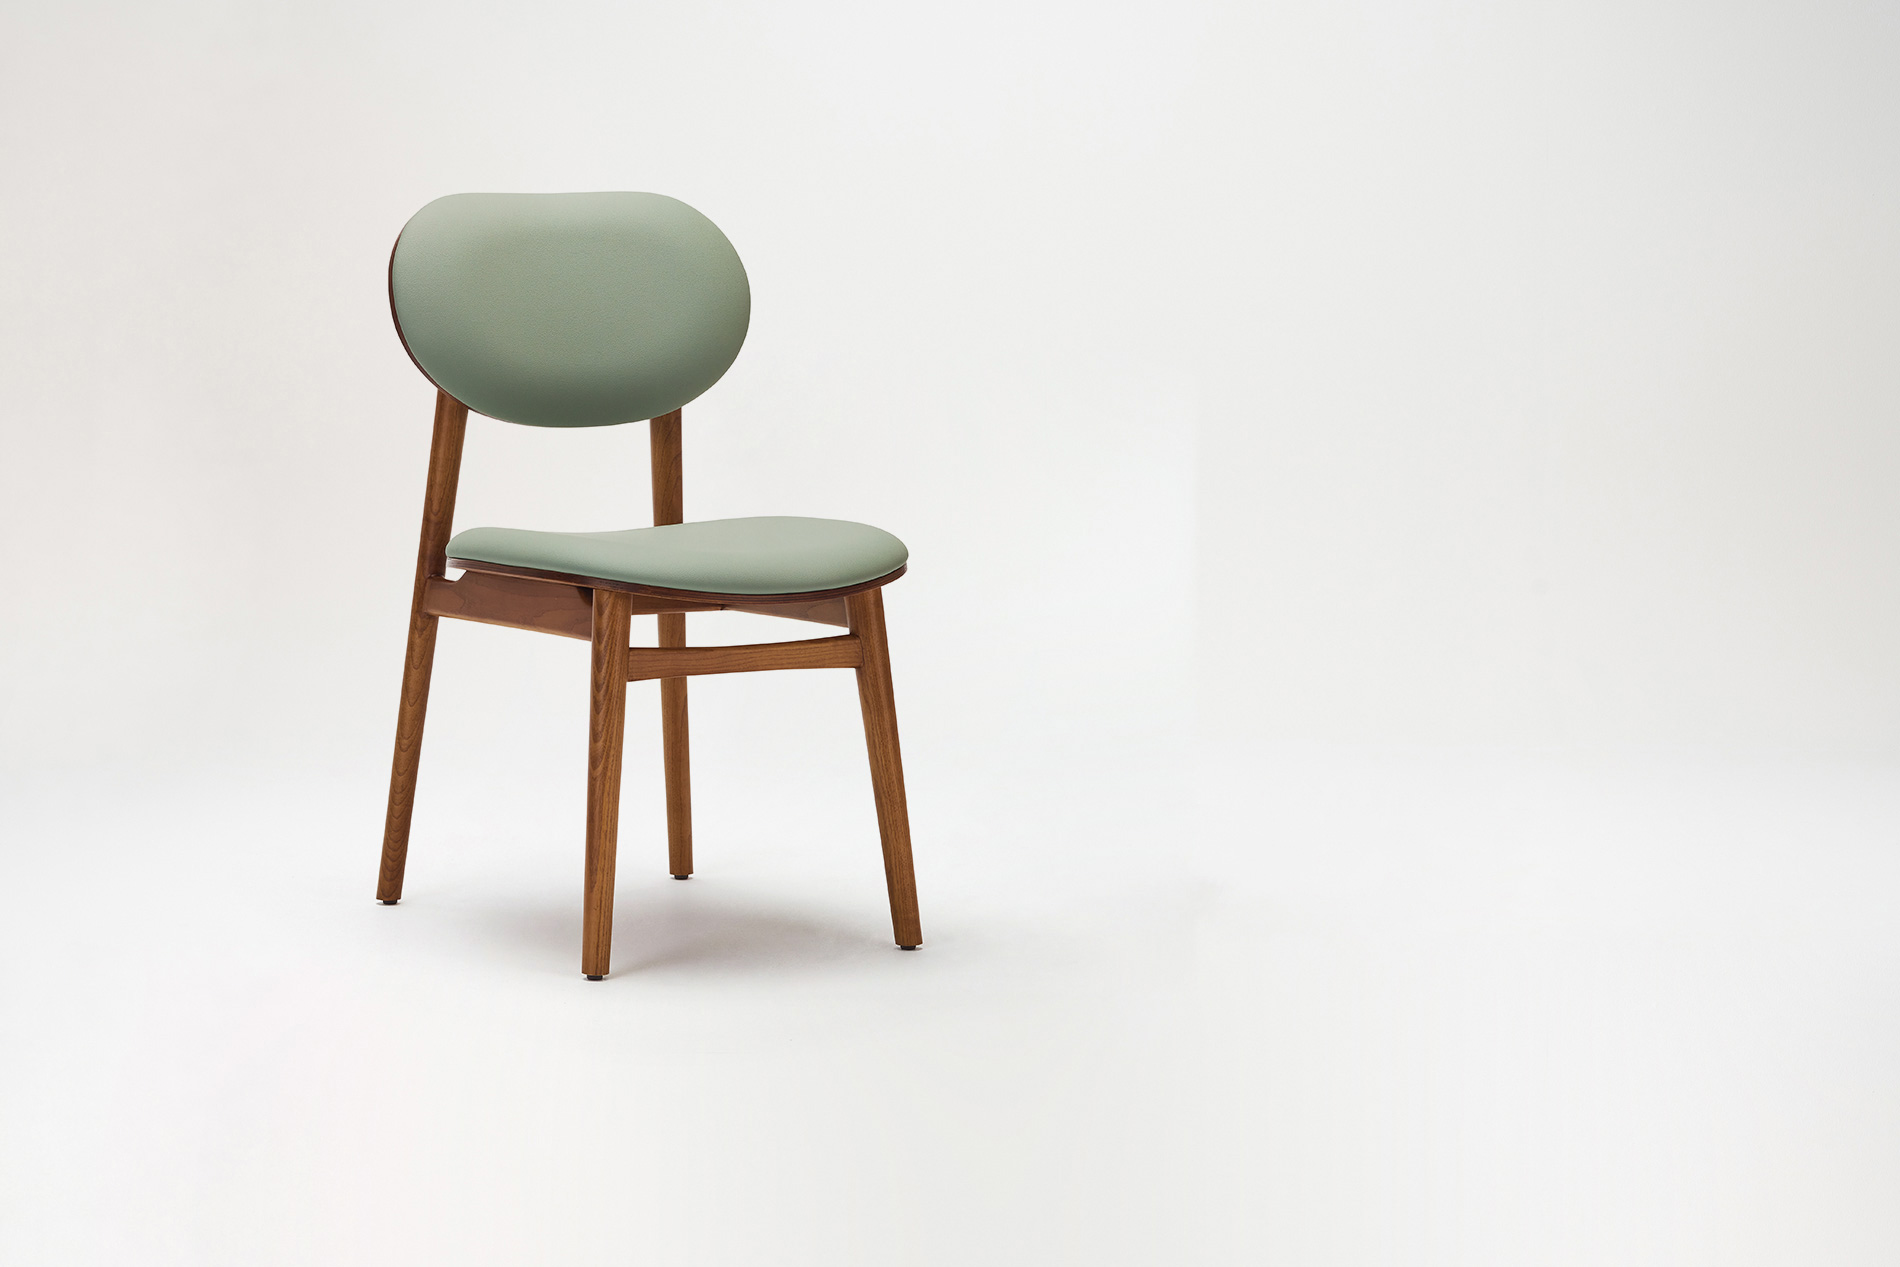 Zoe chair is an elegant perspective on the timeless wooden chair which is referencing the values of forwardthinking craftsmanship.ZOE LARGE SIDE CHAIR